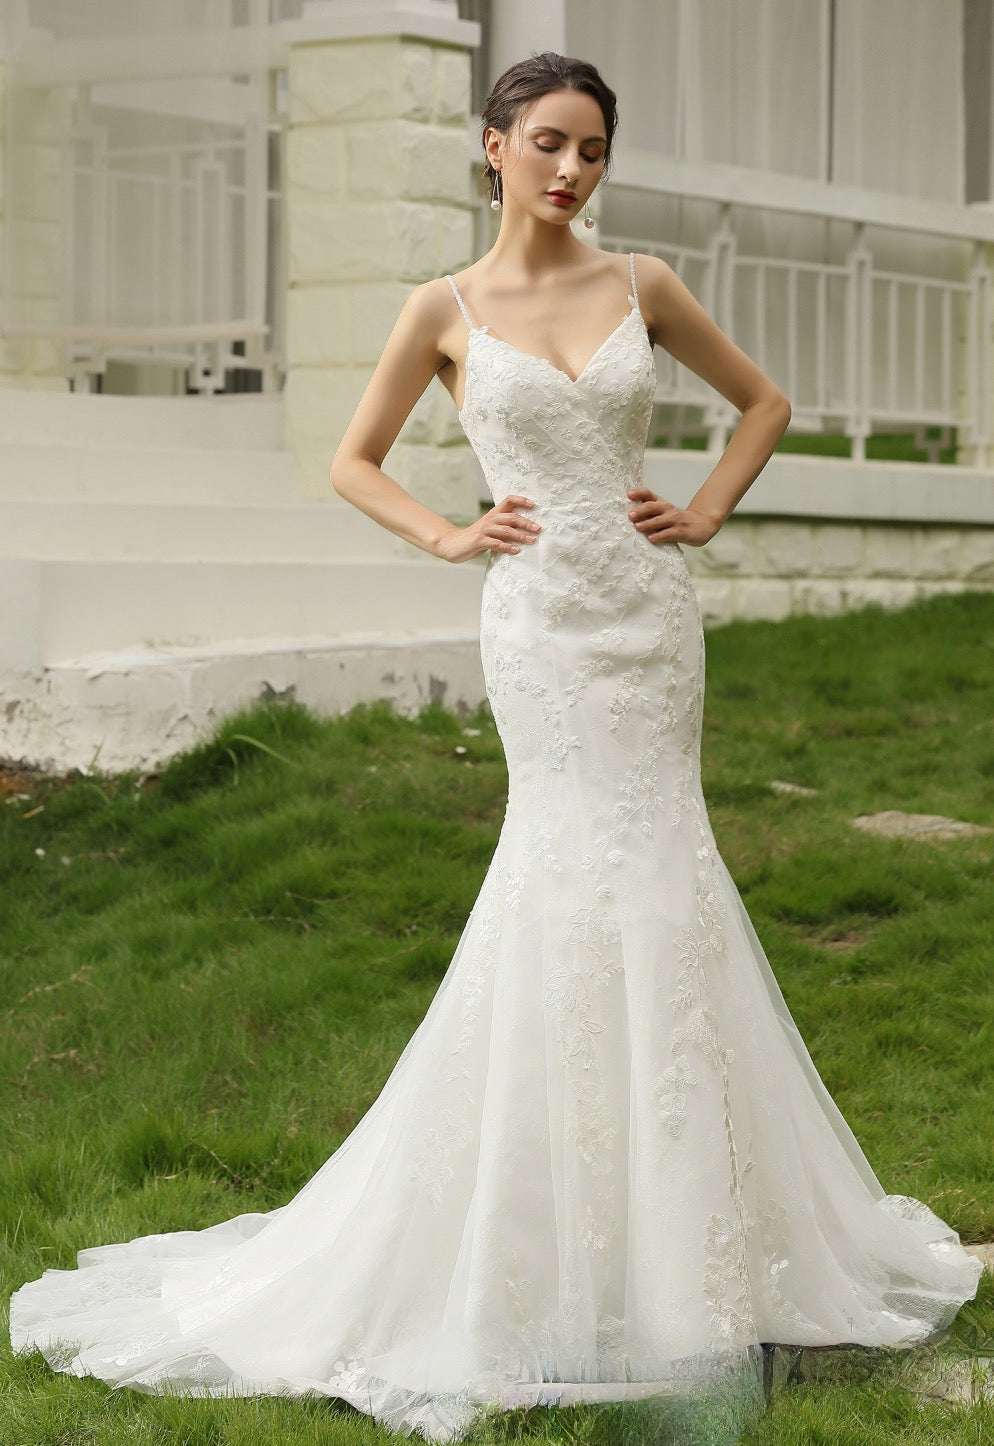 Spaghetti Beading Strap Fit To Flare Wedding Dress – TulleLux